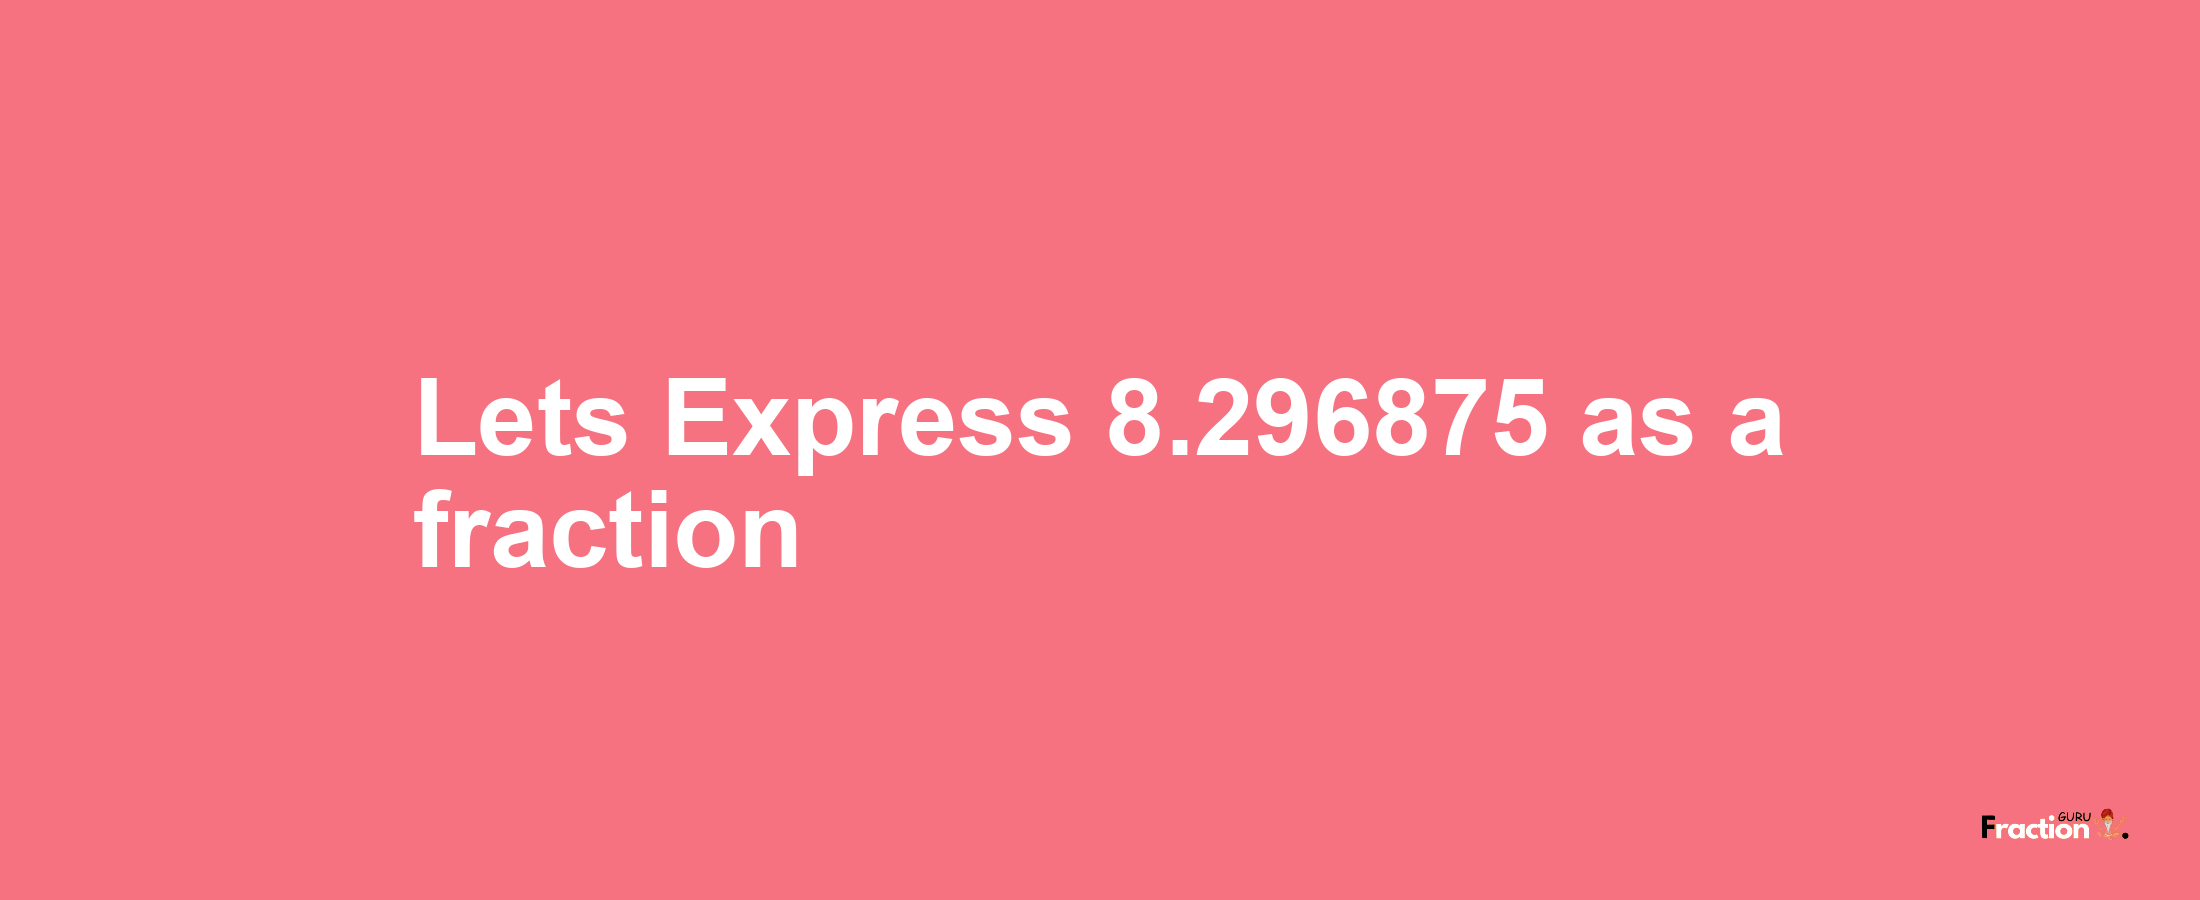 Lets Express 8.296875 as afraction